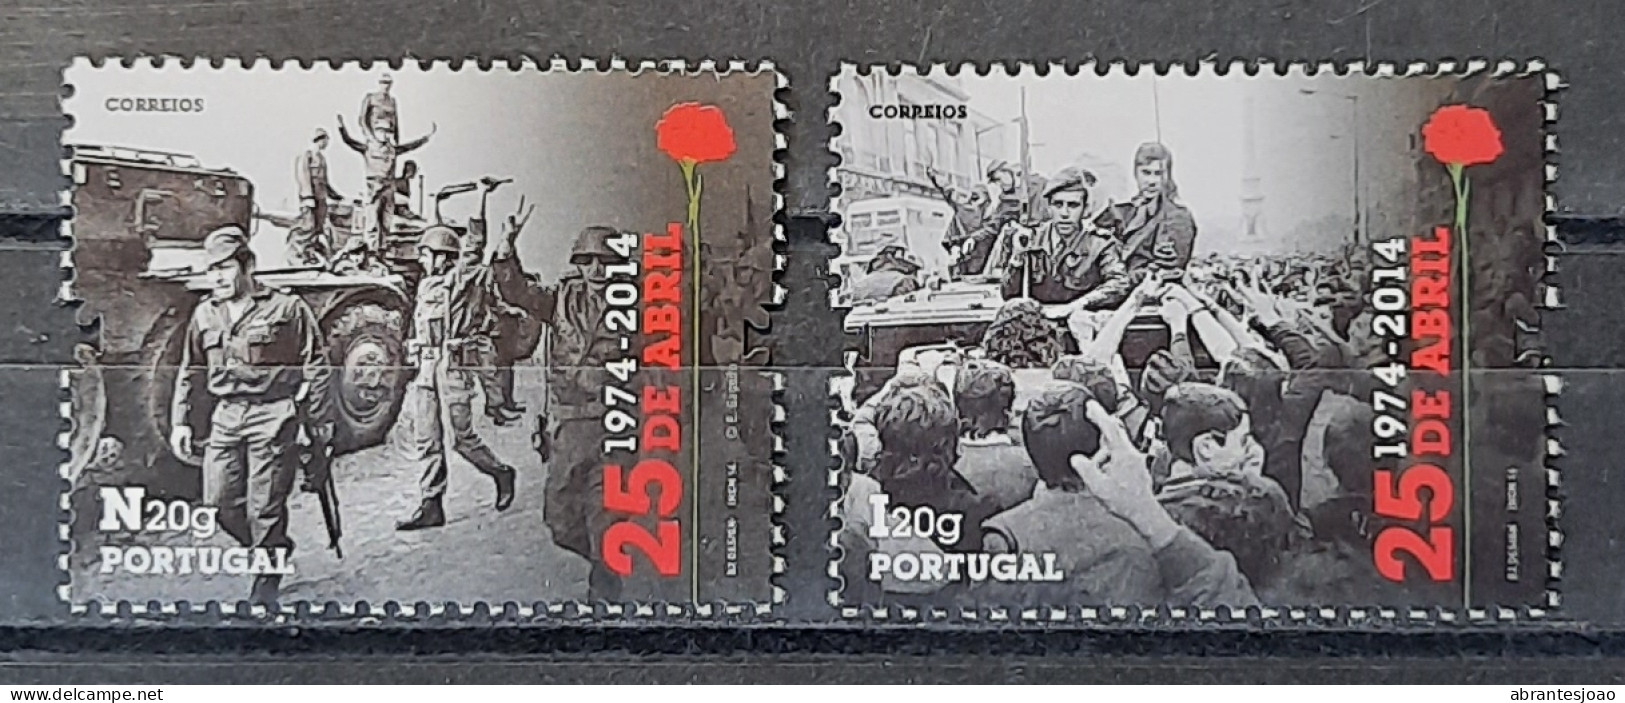 2014 - Portugal - 40 Years Of 25th April Revolution - MNH - 2 Stamps + Souvenir Sheet Of 1 Stamp - Unused Stamps